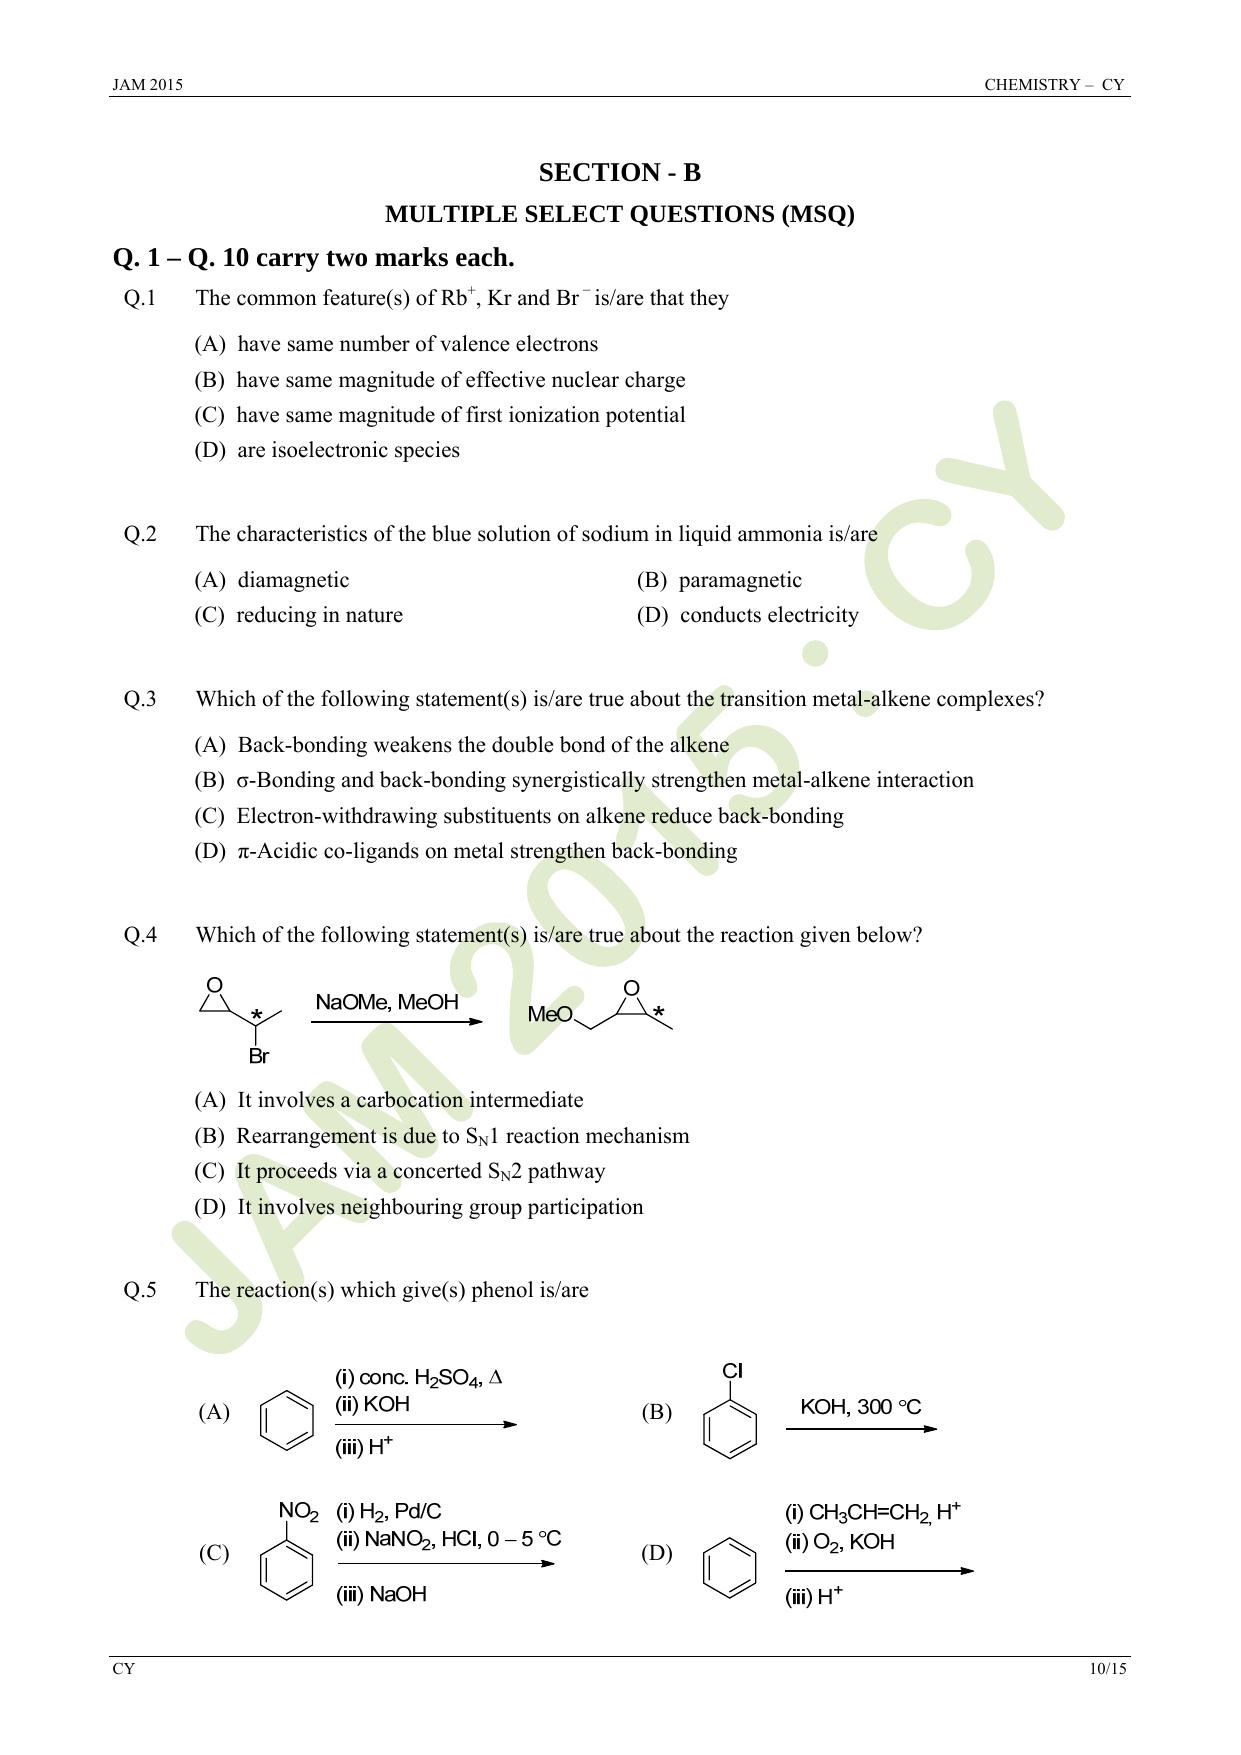 JAM 2015: CY Question Paper - Page 10